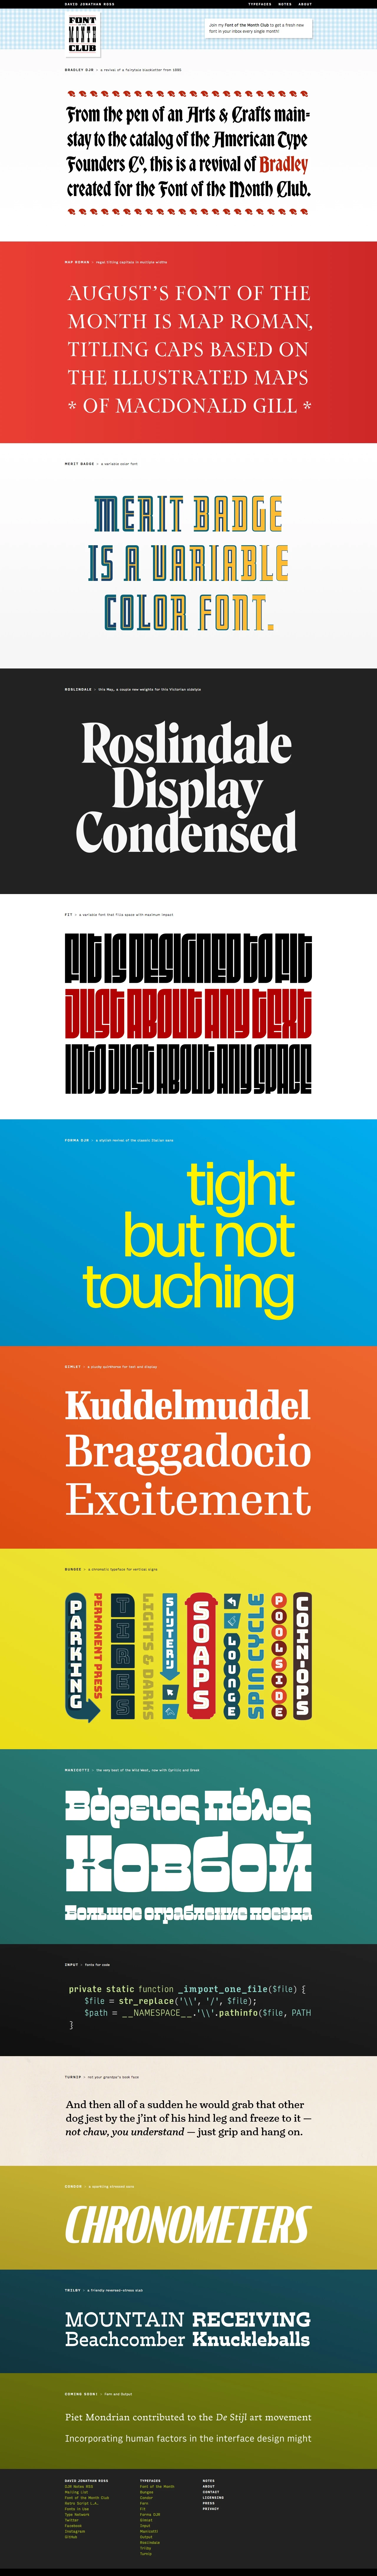 David Jonathan Ross Landing Page Example: The type foundry of David Jonathan Ross (DJR), making fonts such as Fit, Forma DJR, Gimlet, Manicotti, Input, Turnip, Condor, Trilby, Fern, and Output.